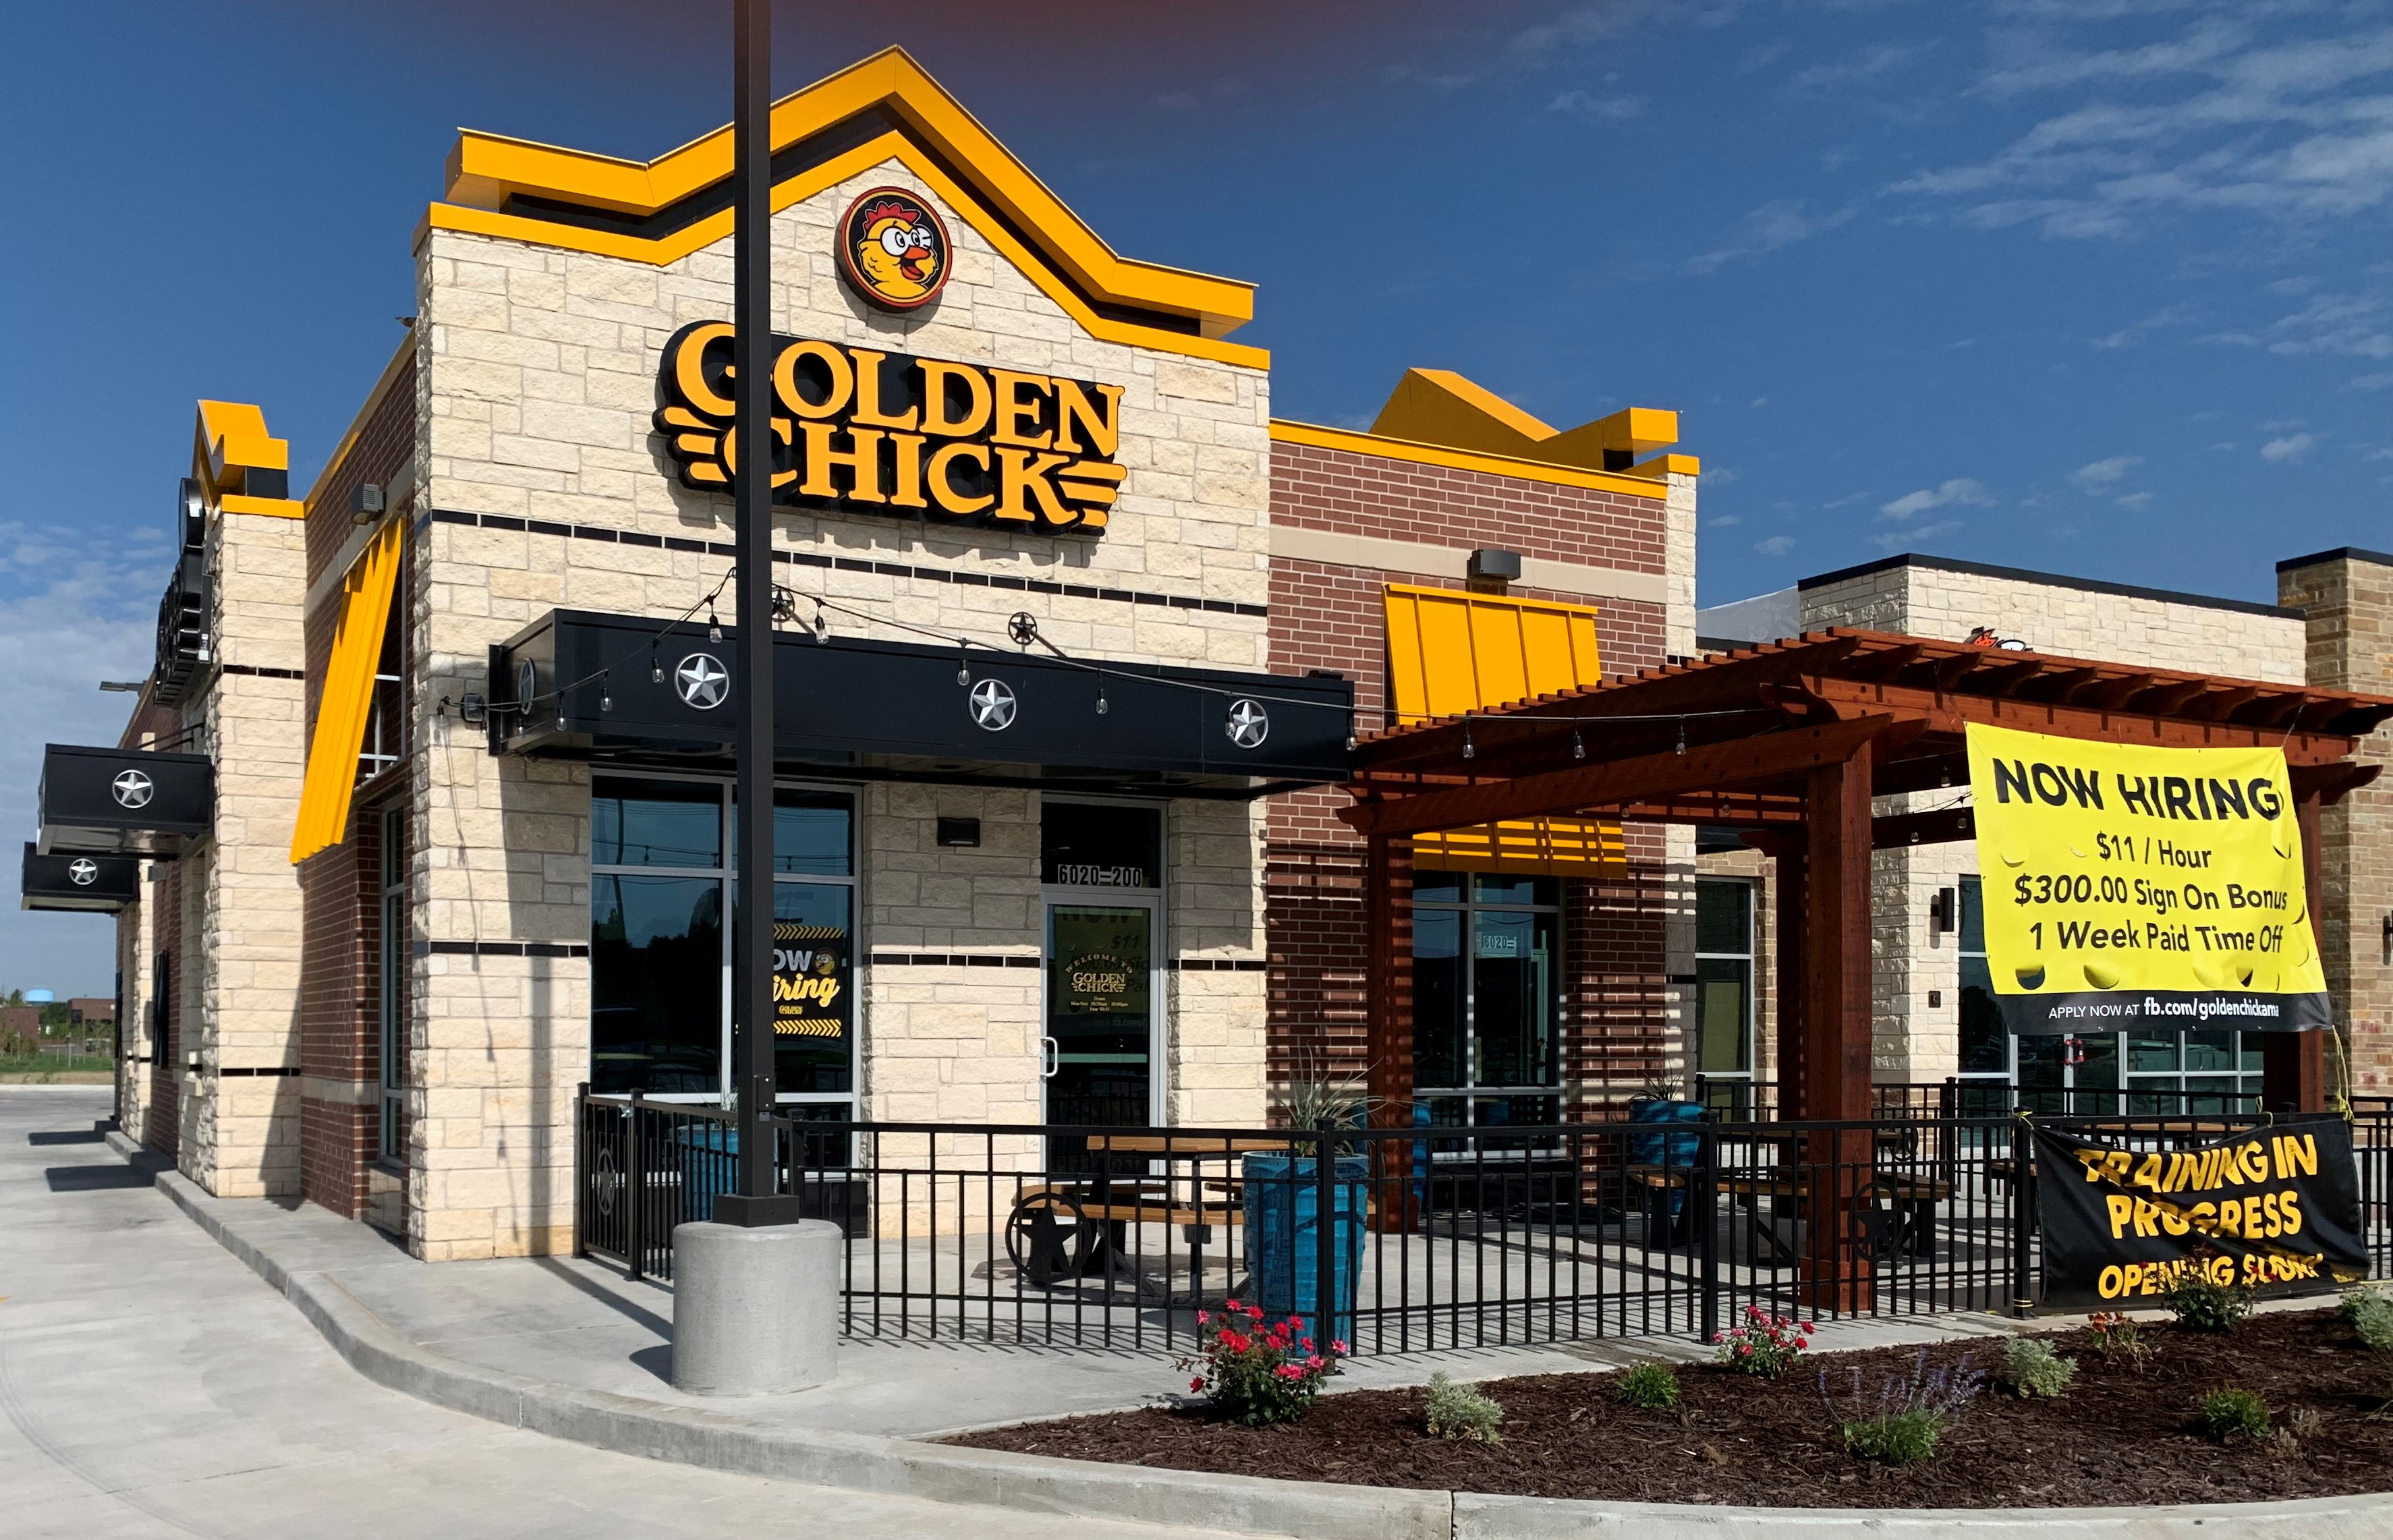 Golden Chick storefront.  Your local Golden Chick fast food restaurant in Amarillo, Texas